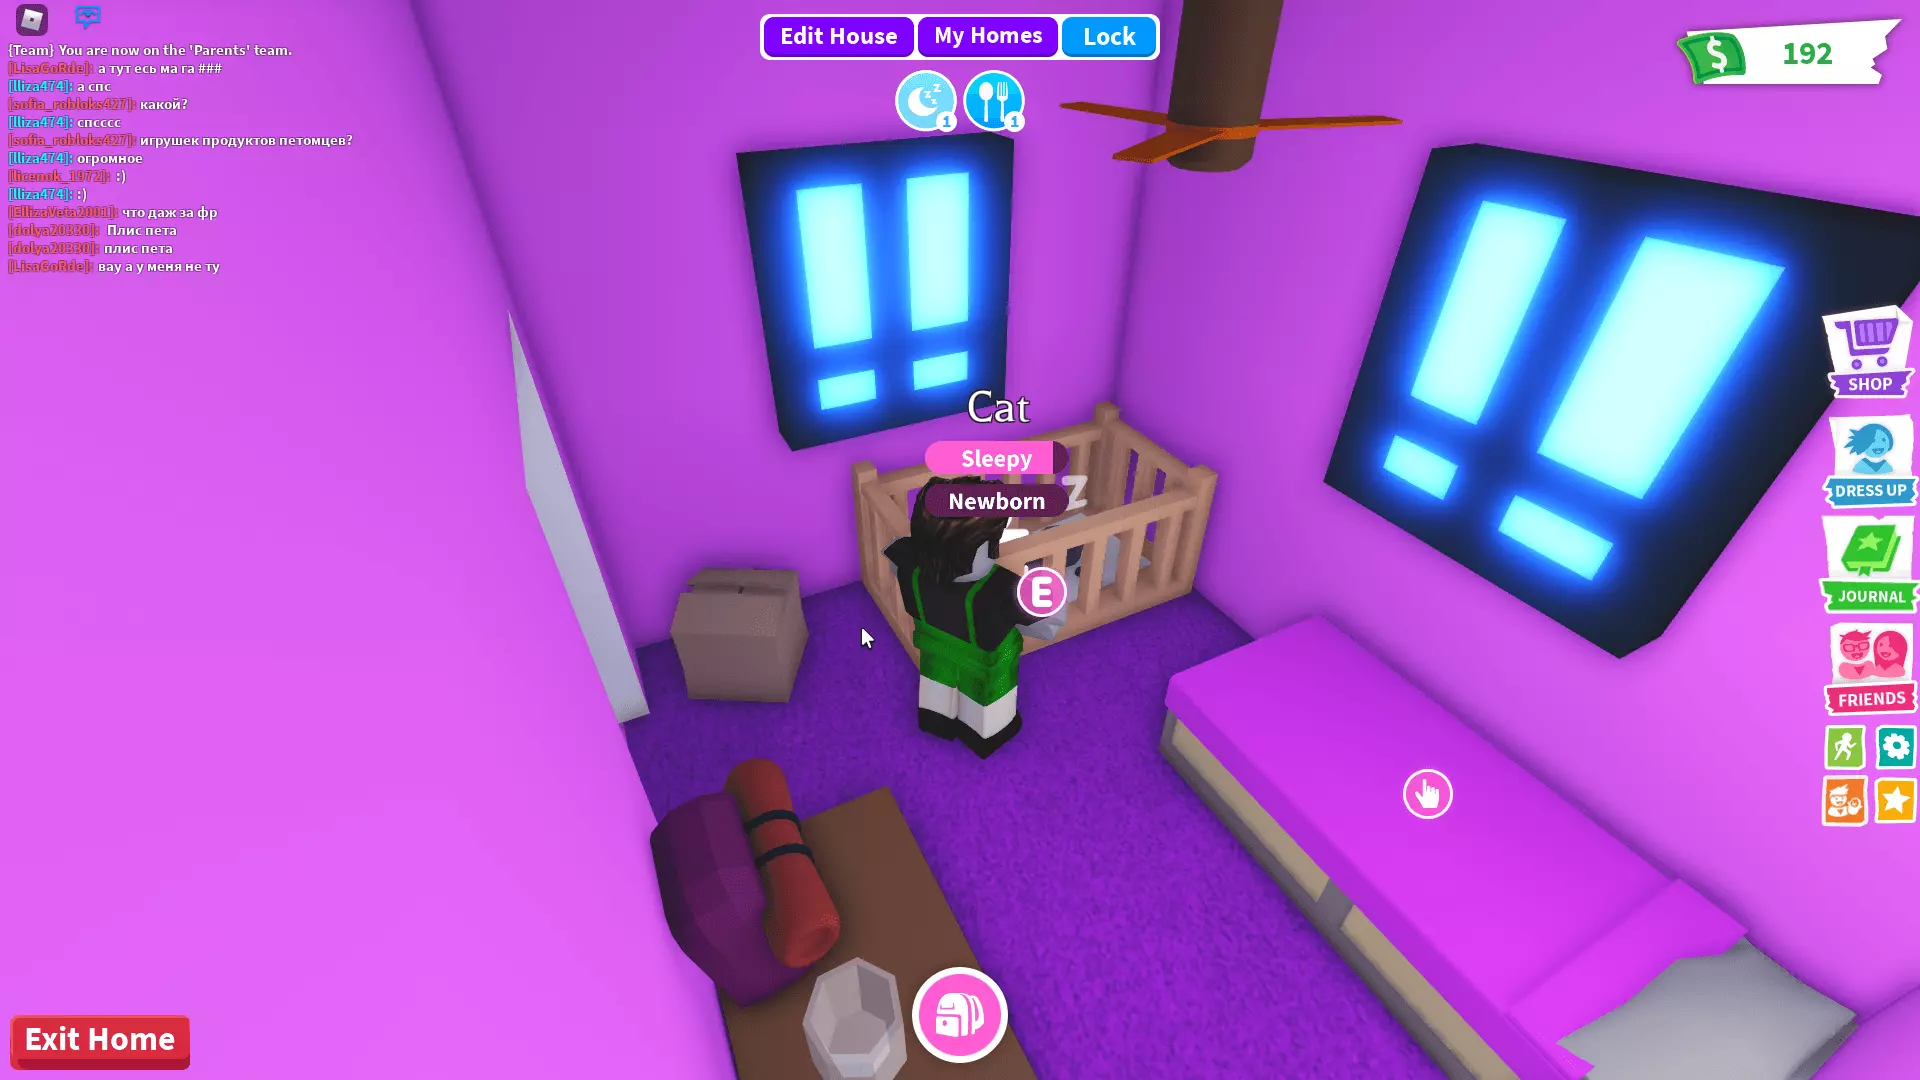 Roblox responds to the hack that allowed a child's avatar to be raped in  its game